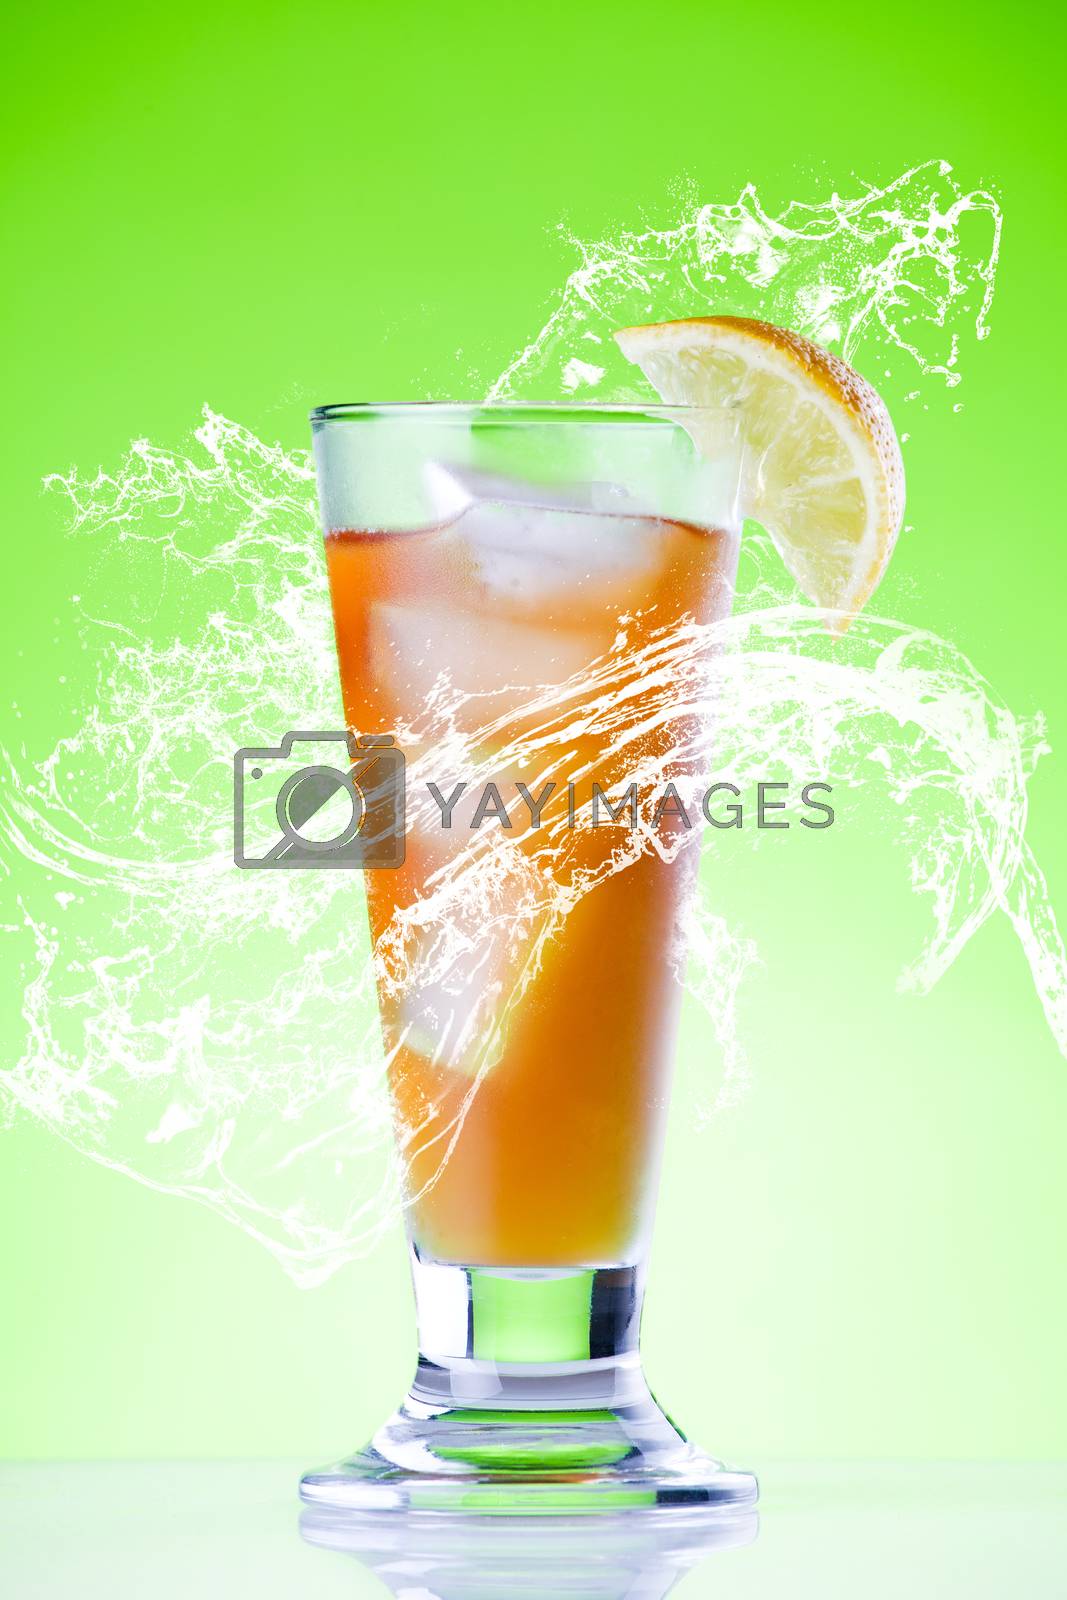 Royalty free image of Cold Tea by mpessaris